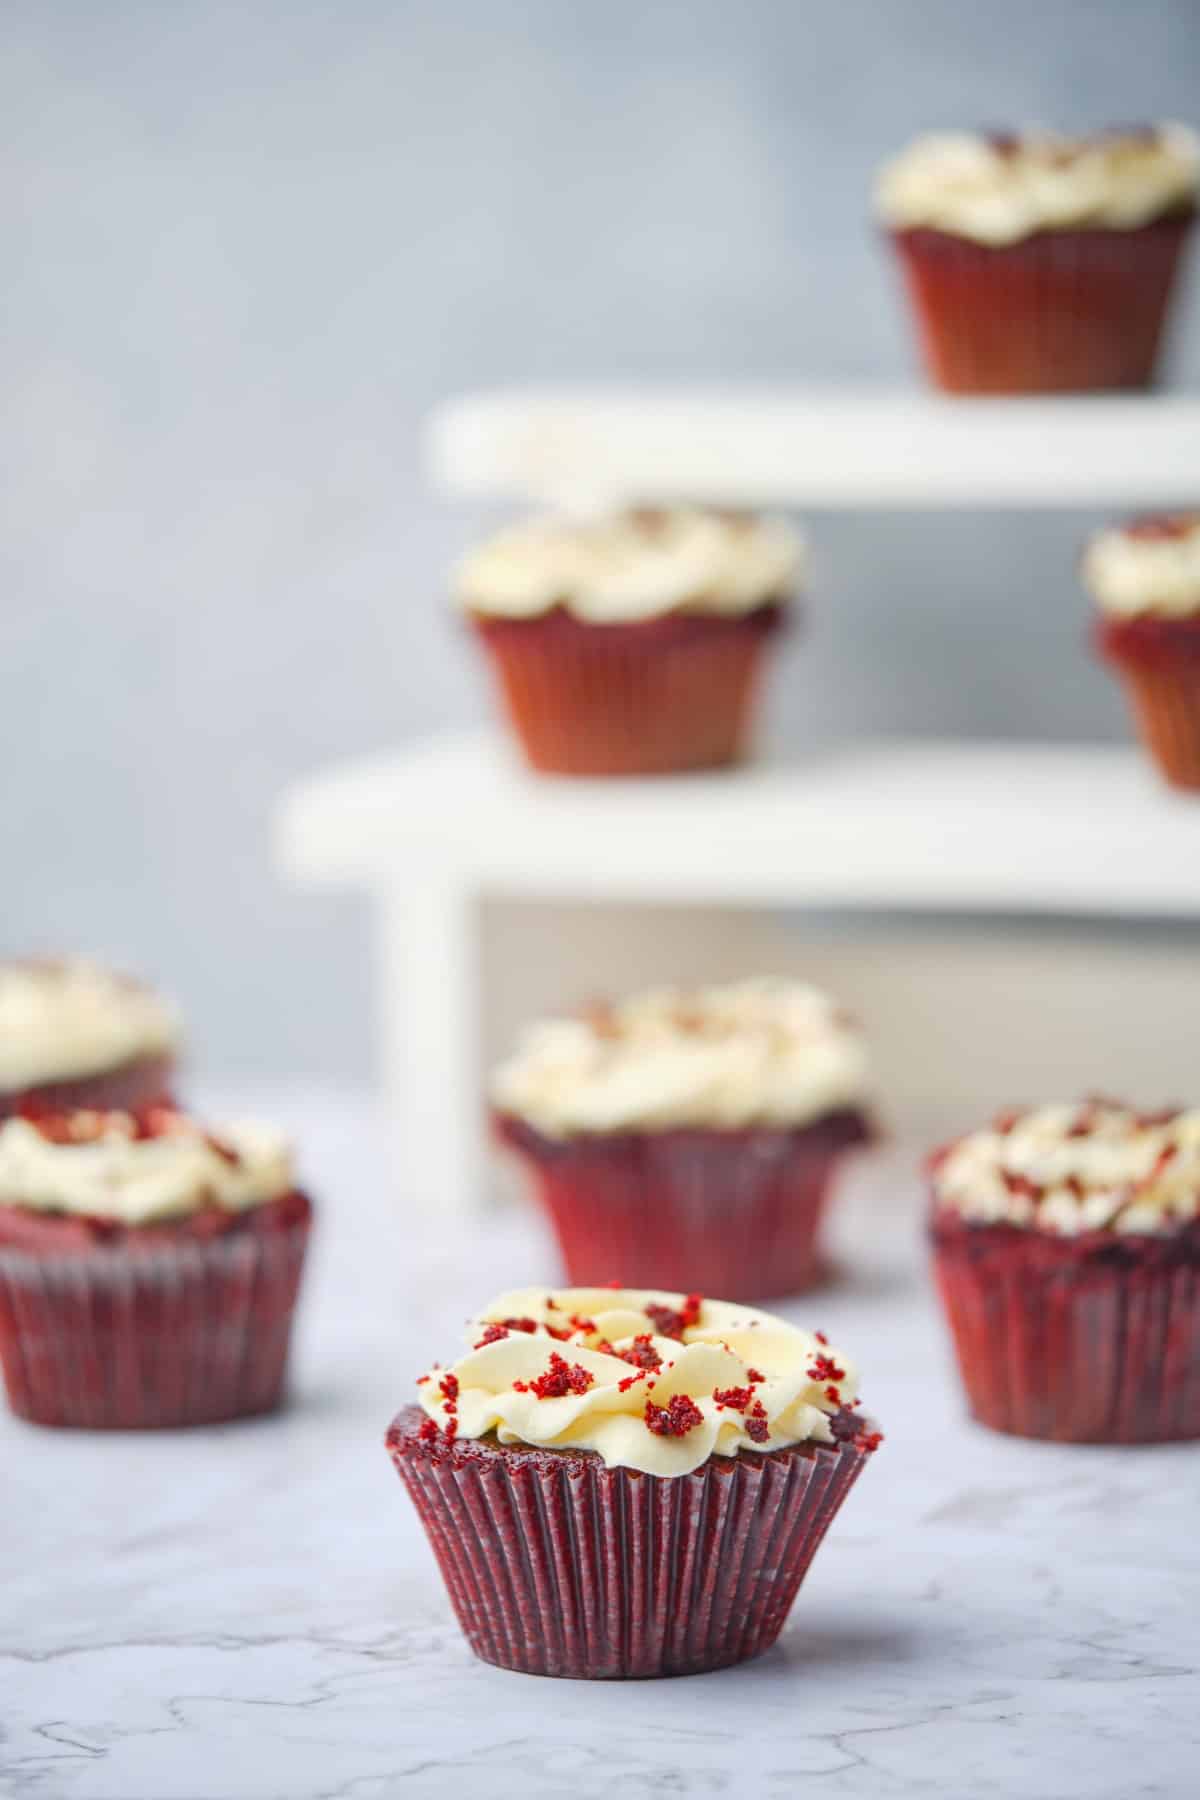 Several Red velvet cupcakes with cream cheese buttercream frosting.